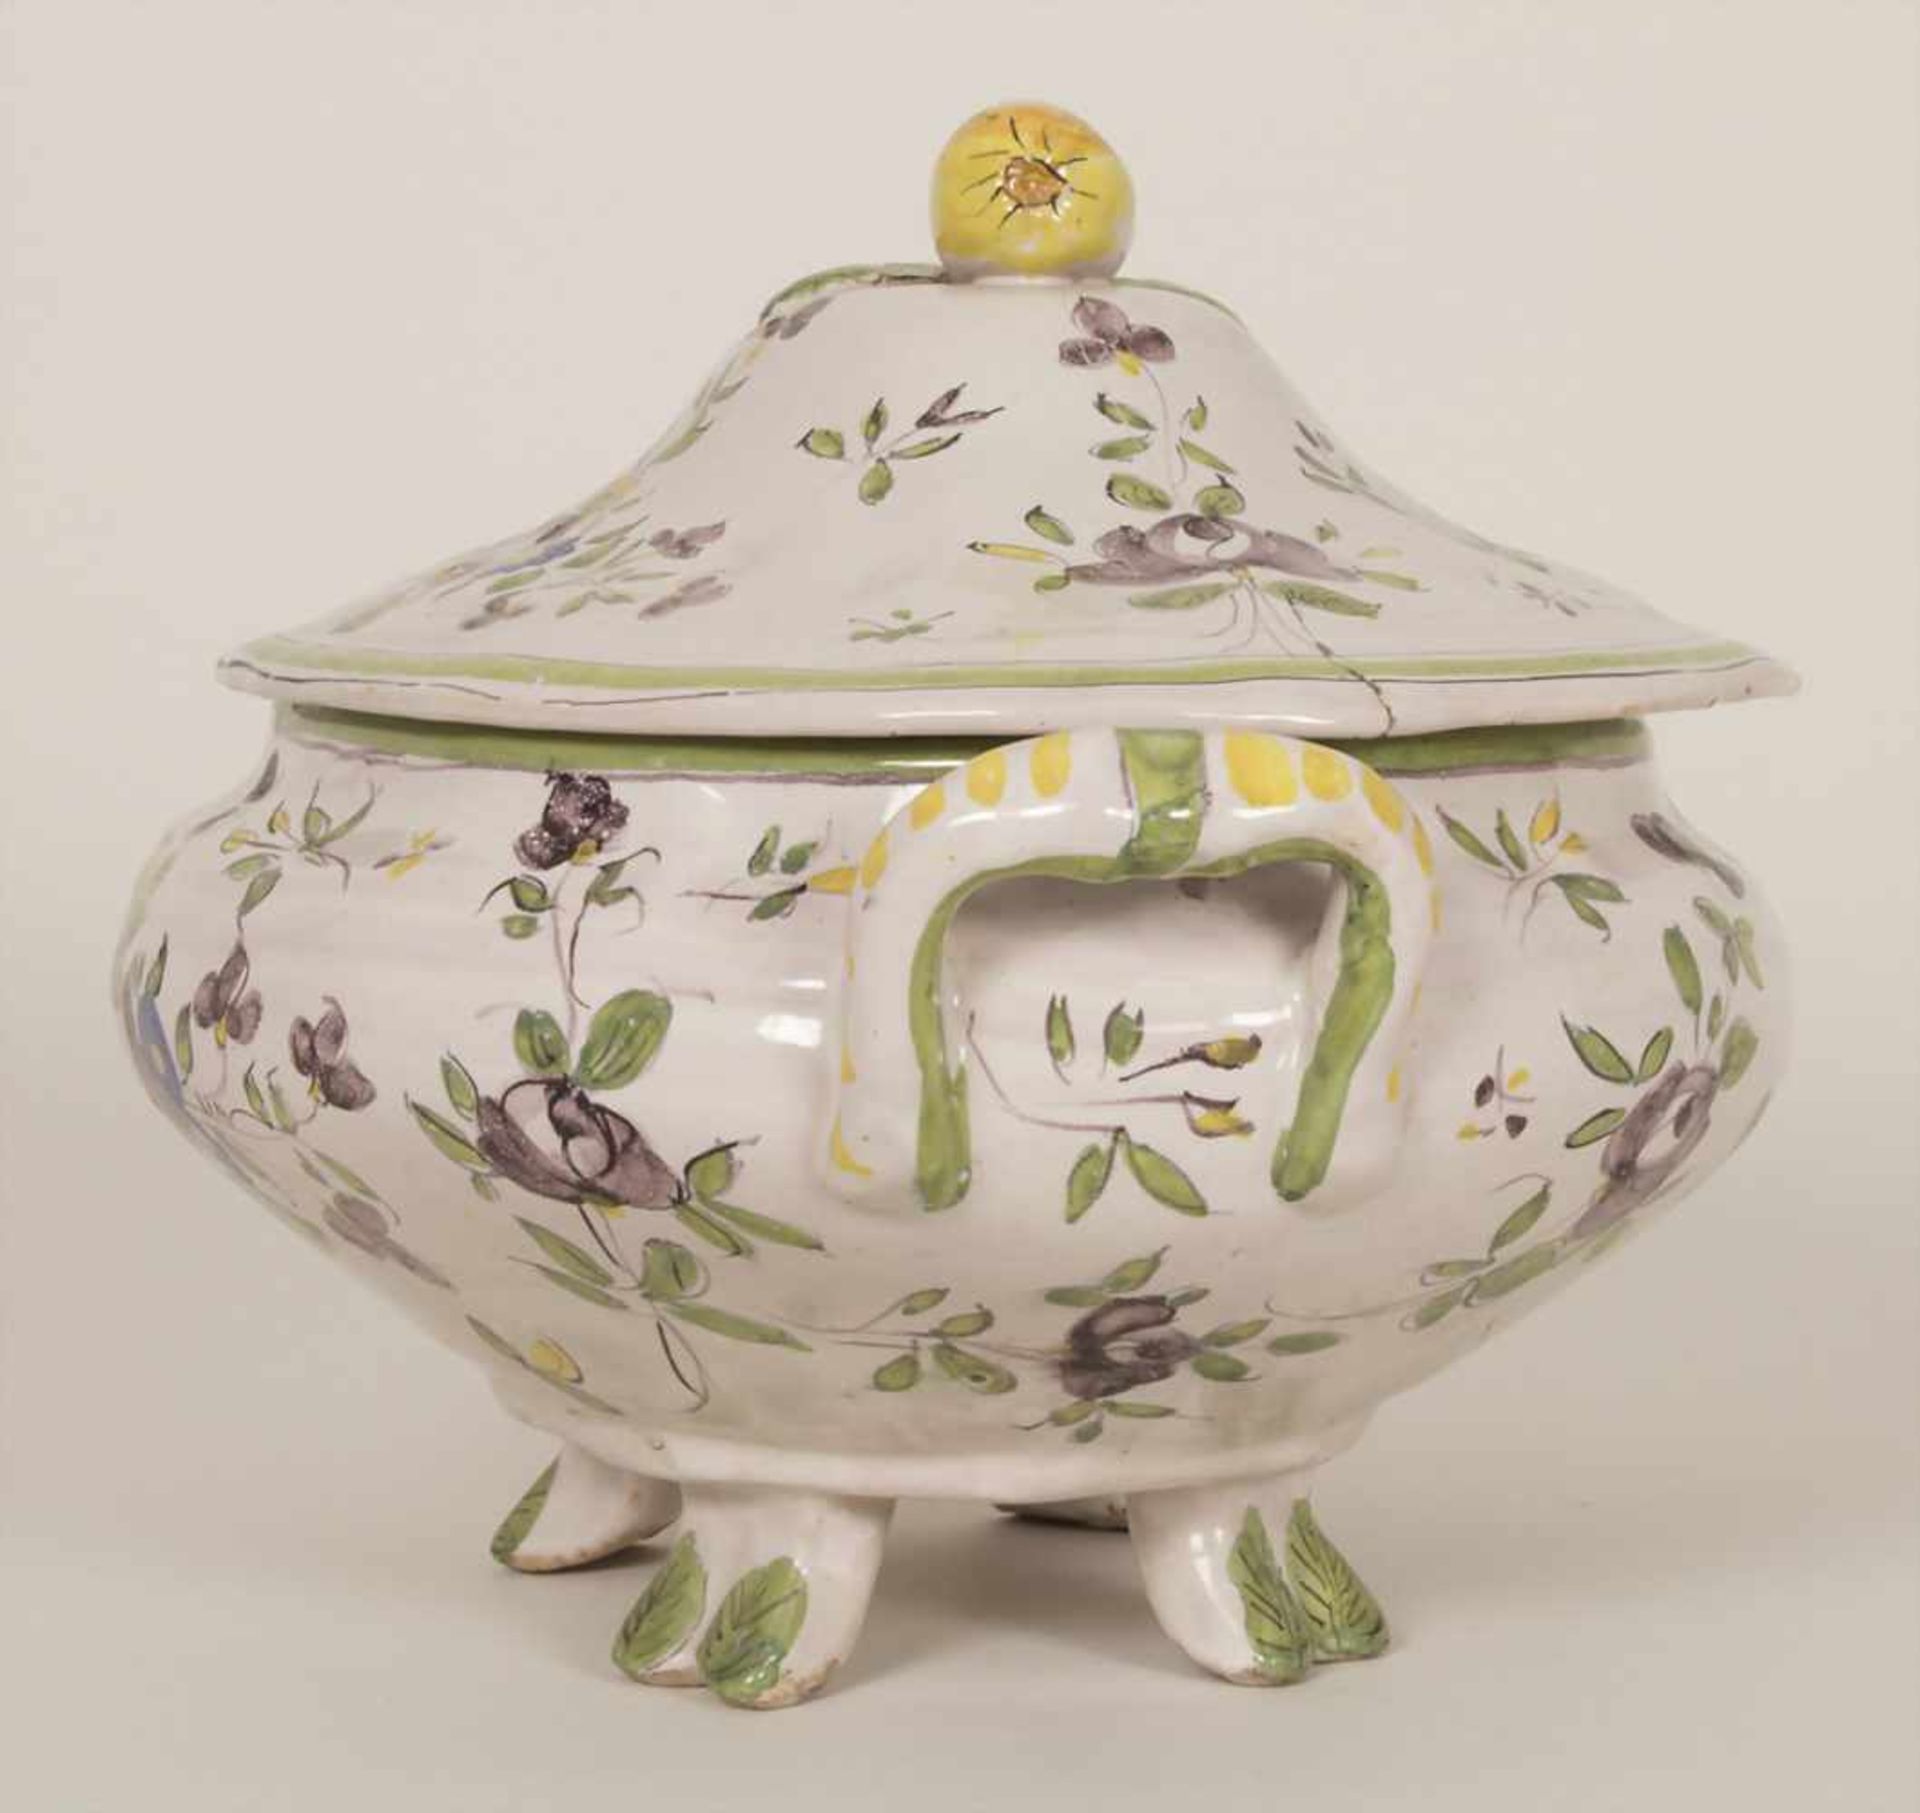 Fayence-Deckelterinne / A faience covered tureen, 18./19. Jh.Material: Keramik, floral polychrom - Bild 2 aus 8